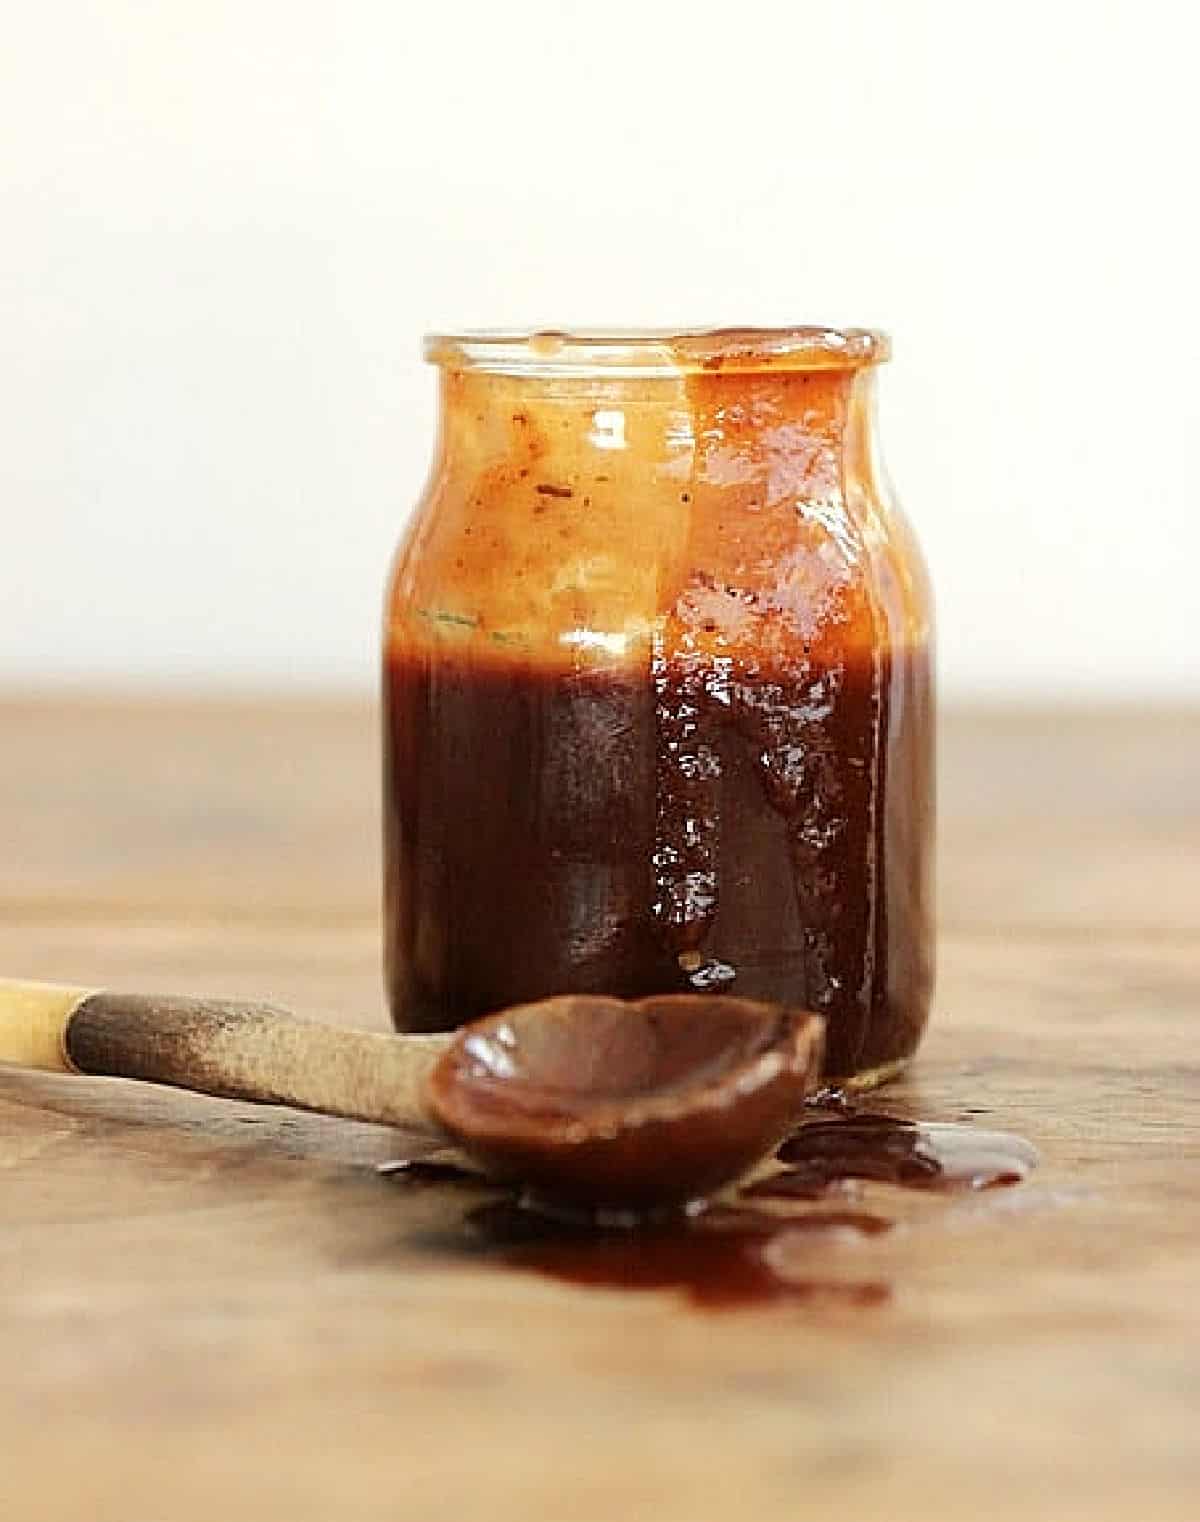 Dripping jar with brown barbecue sauce, a wooden spoon on a wooden surface.